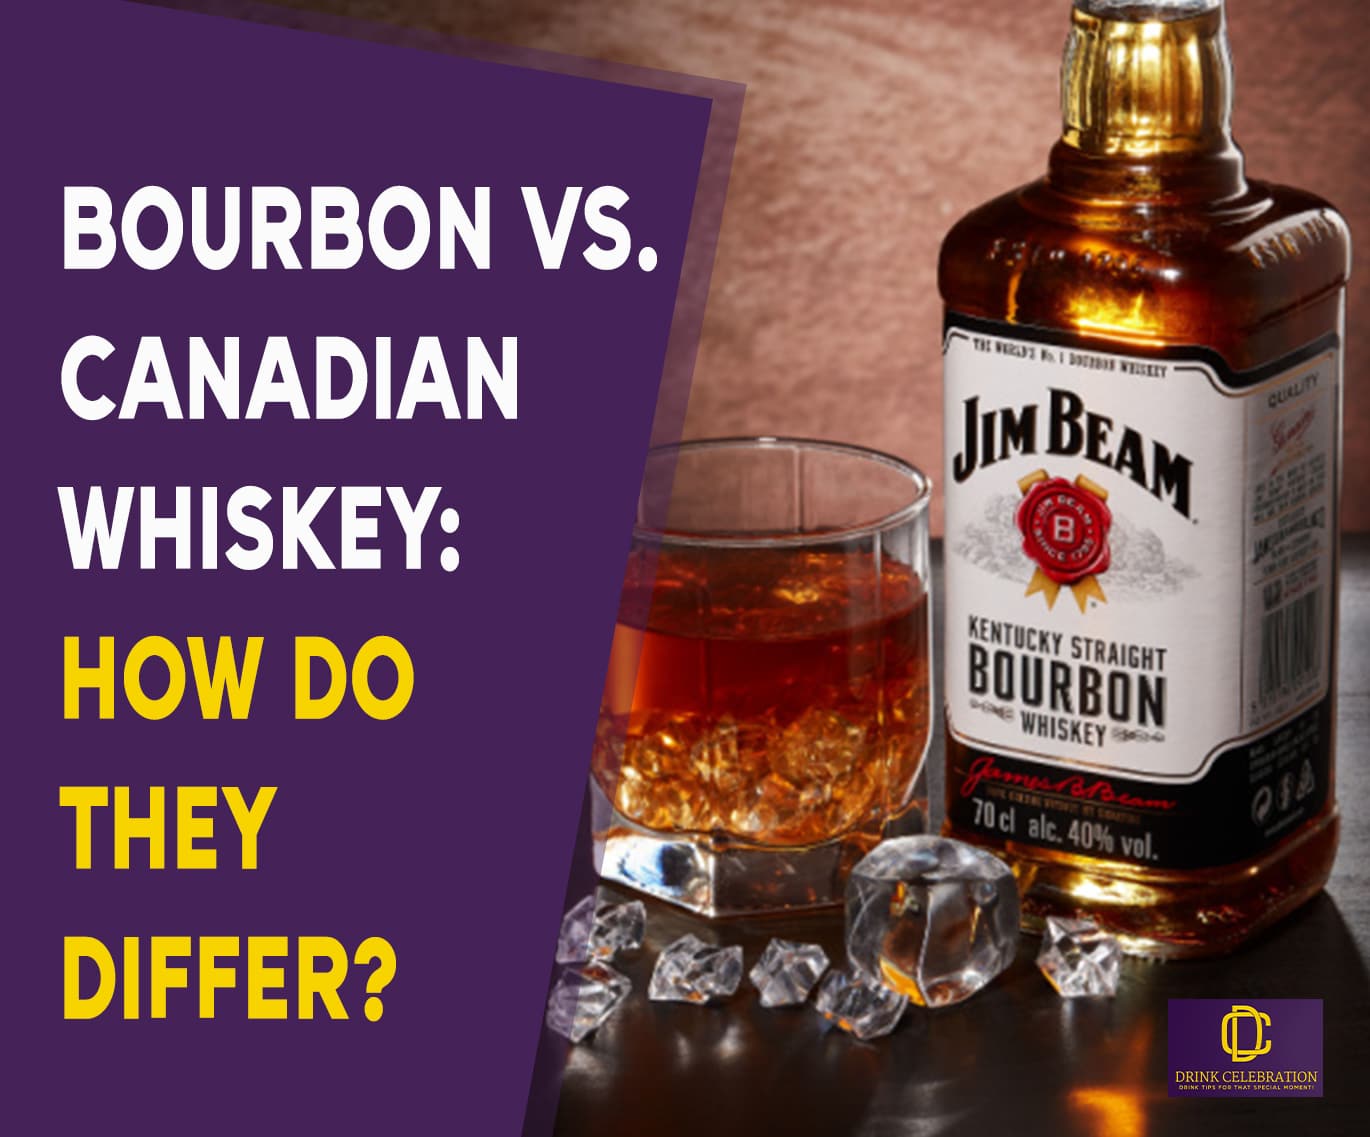 Bourbon vs. Canadian Whiskey: How Do They Differ?